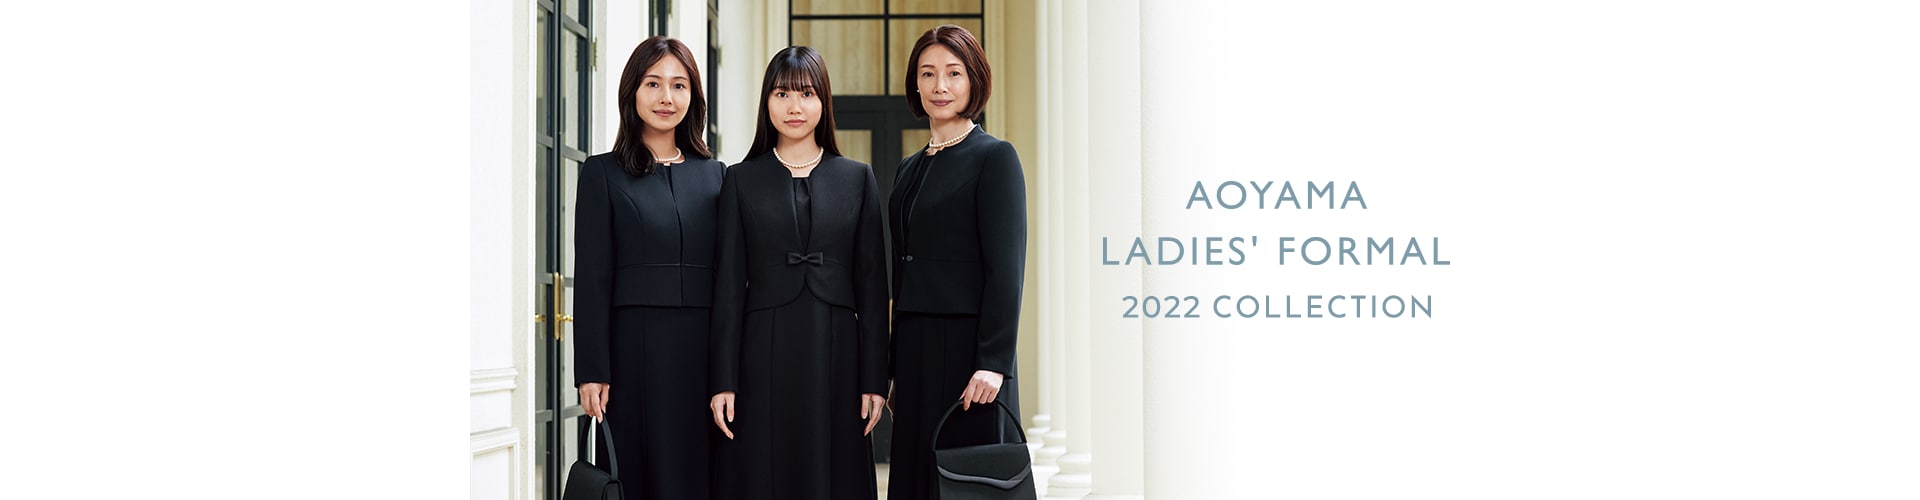 AOYAMA LADIES FORMAL 2022 COLLECTION